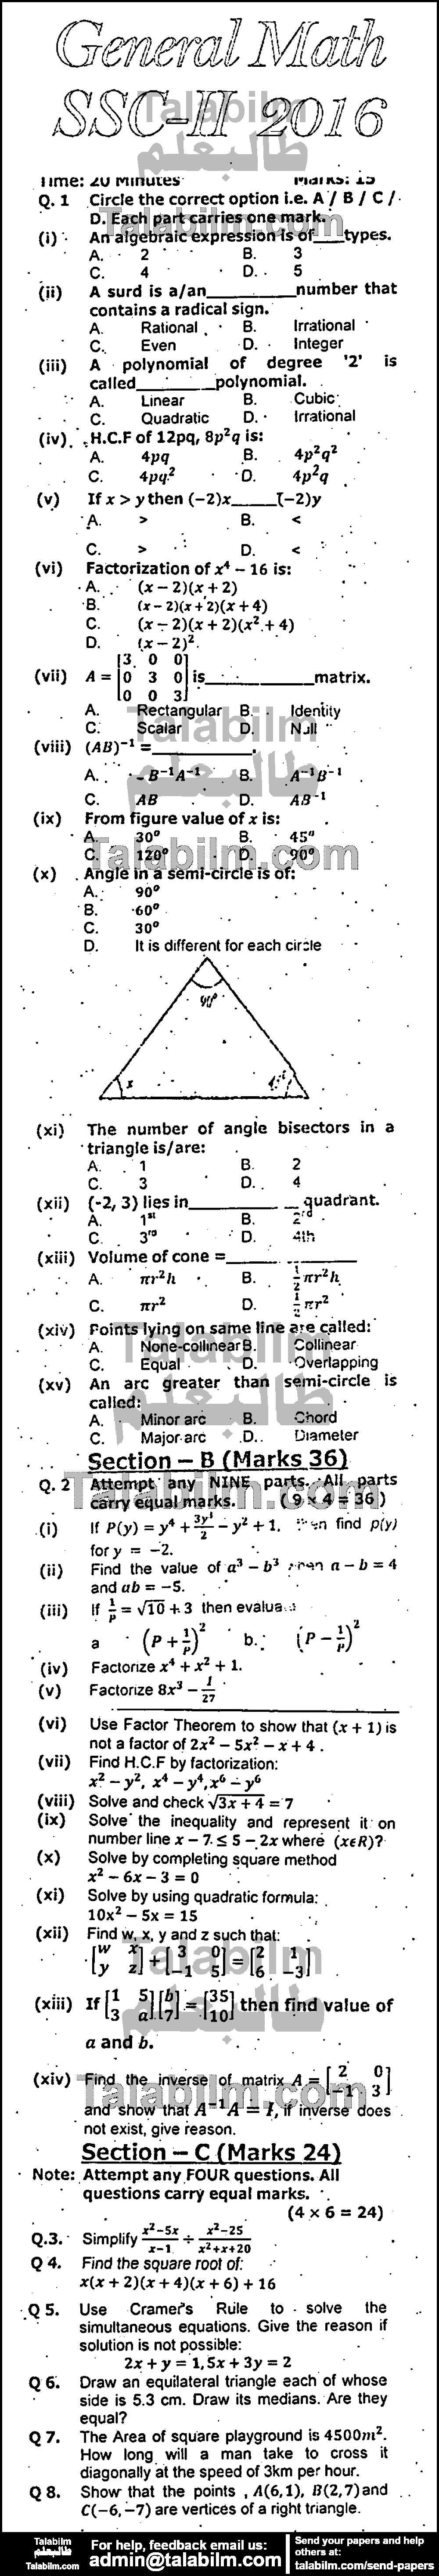 General Math 0 past paper for 2016 Group-I